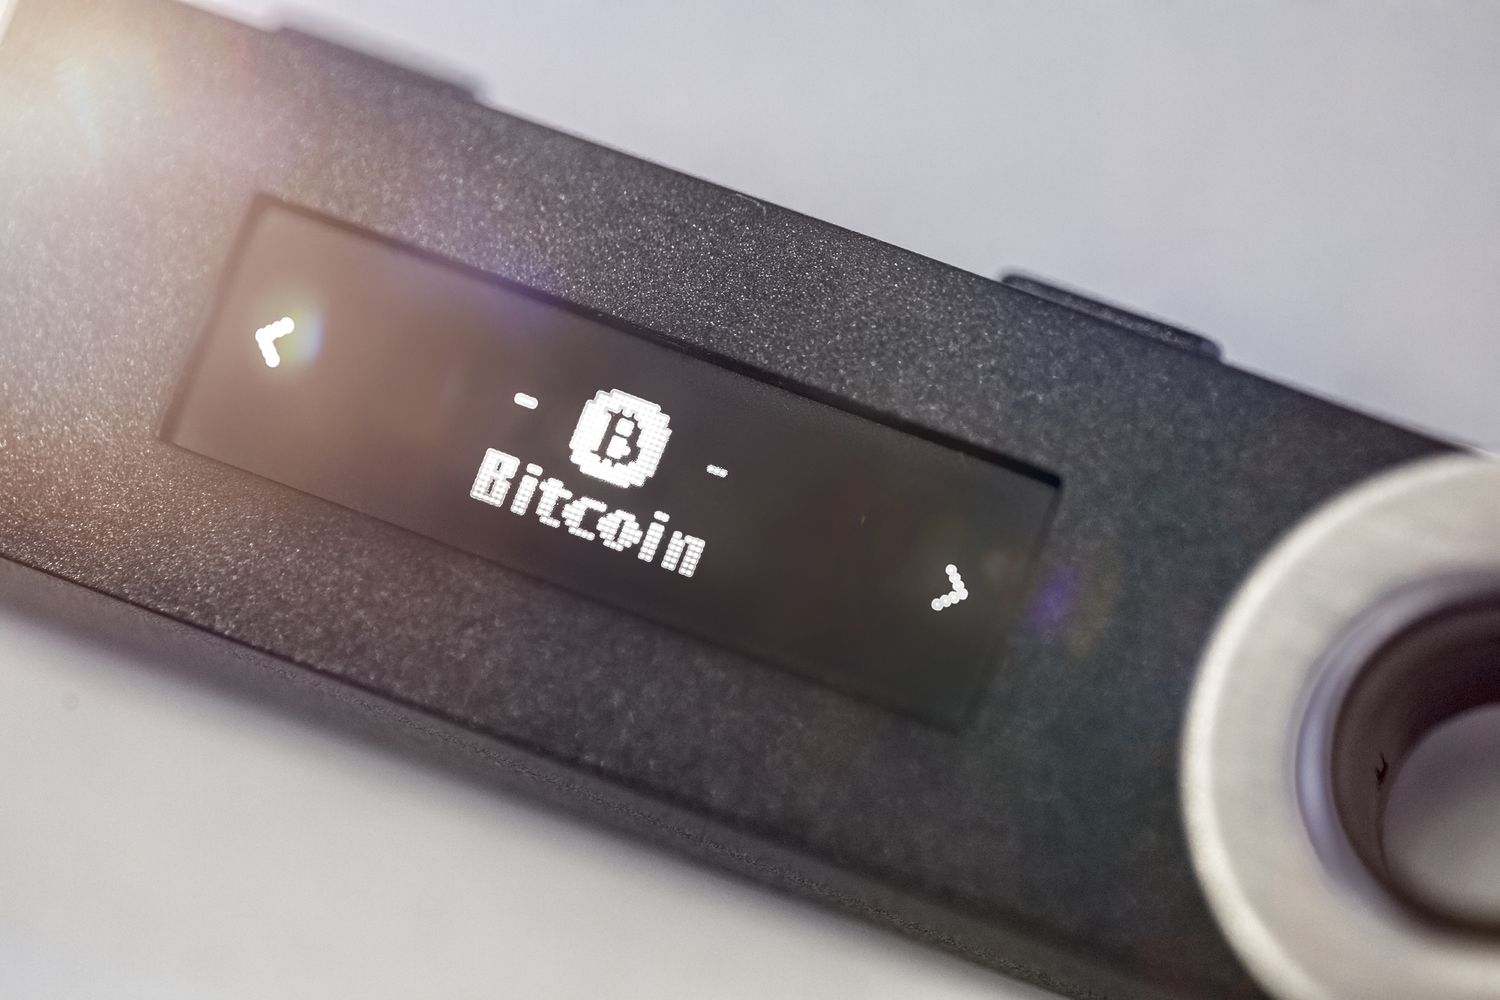 How To Store Bitcoin On Usb